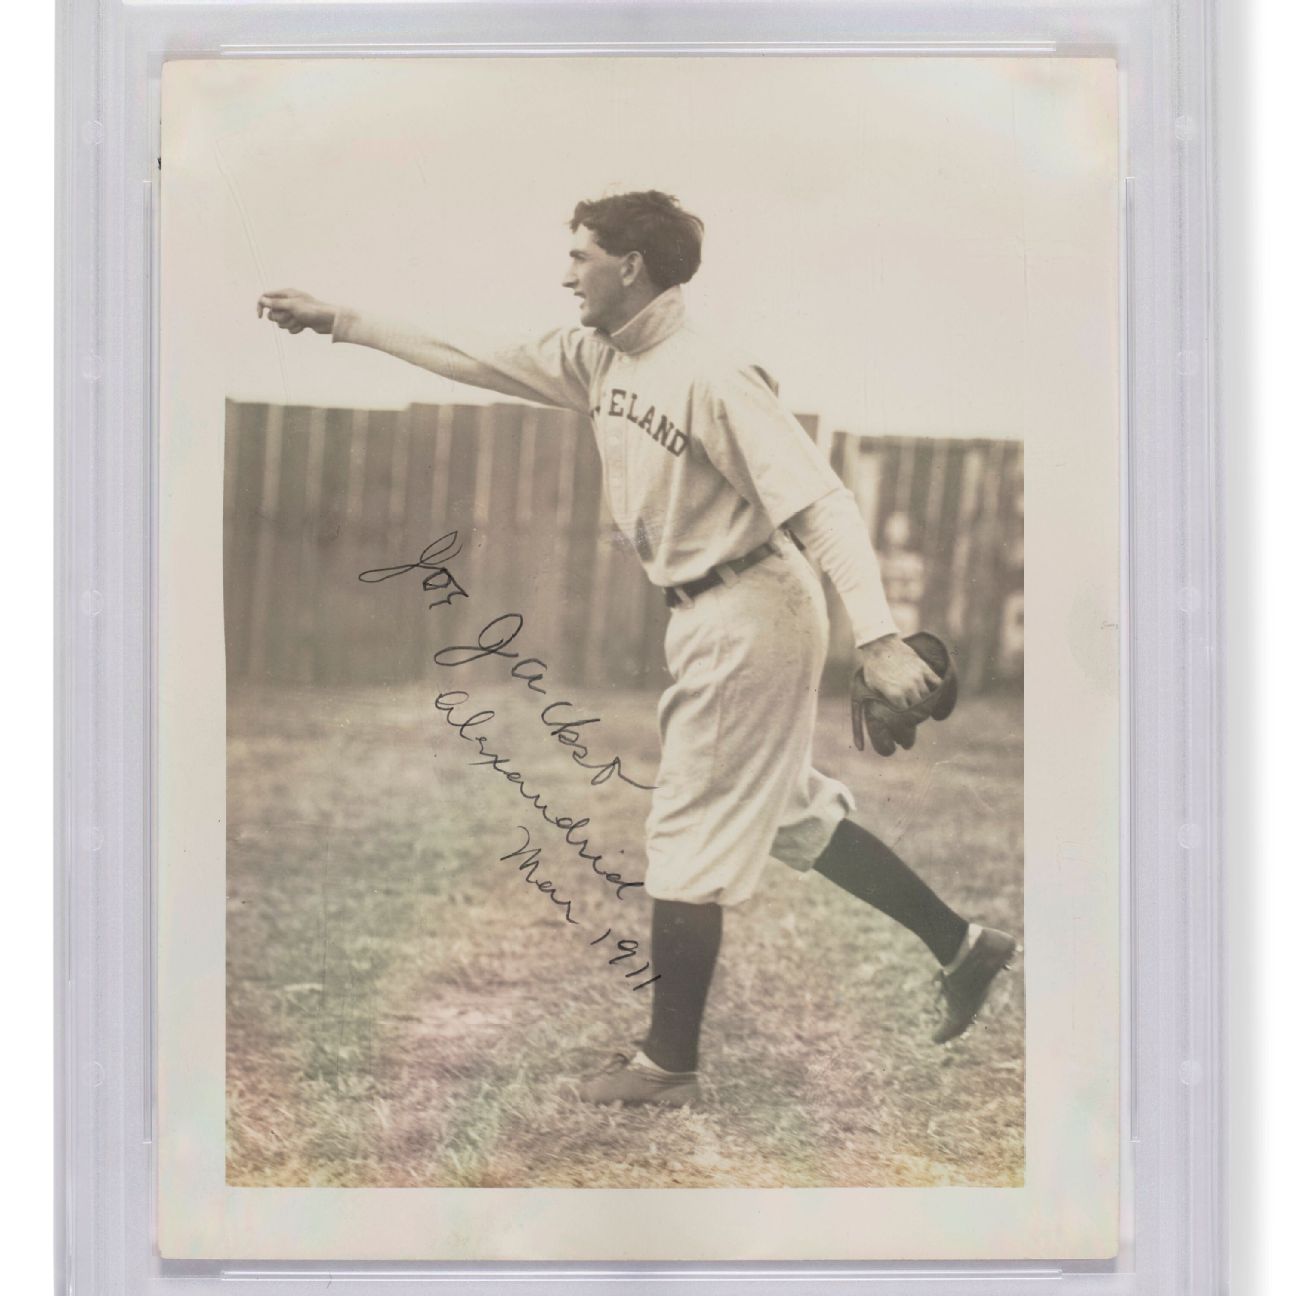 Sold At Auction: “Shoeless” Joe Jackson Hand Signed By, 51% OFF